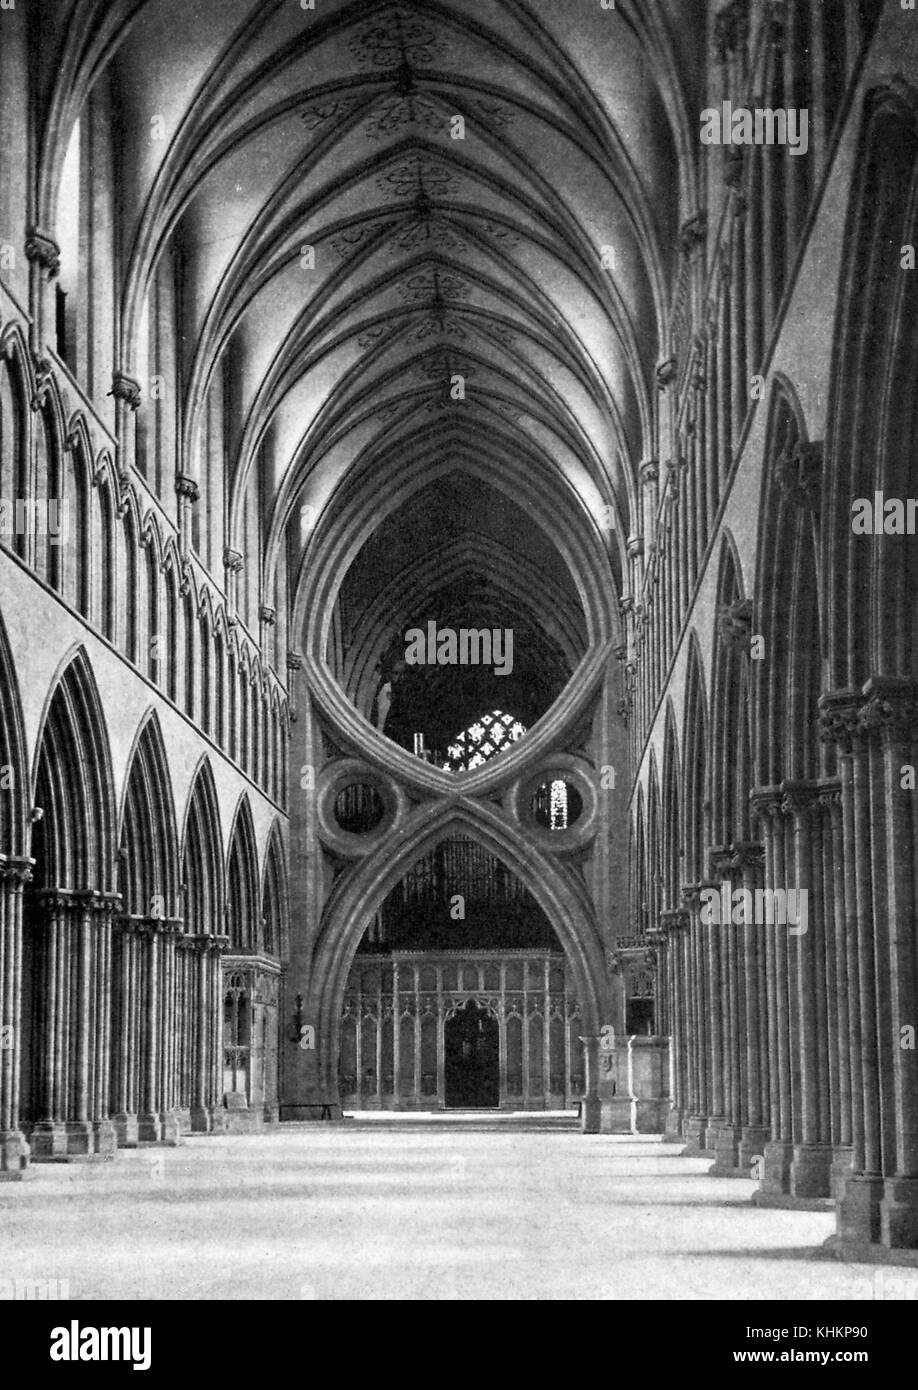 The Inverted Arches of the Wells Cathedral, erbaut im Mittelalter, Somerset, England, Juli 1922. Stockfoto